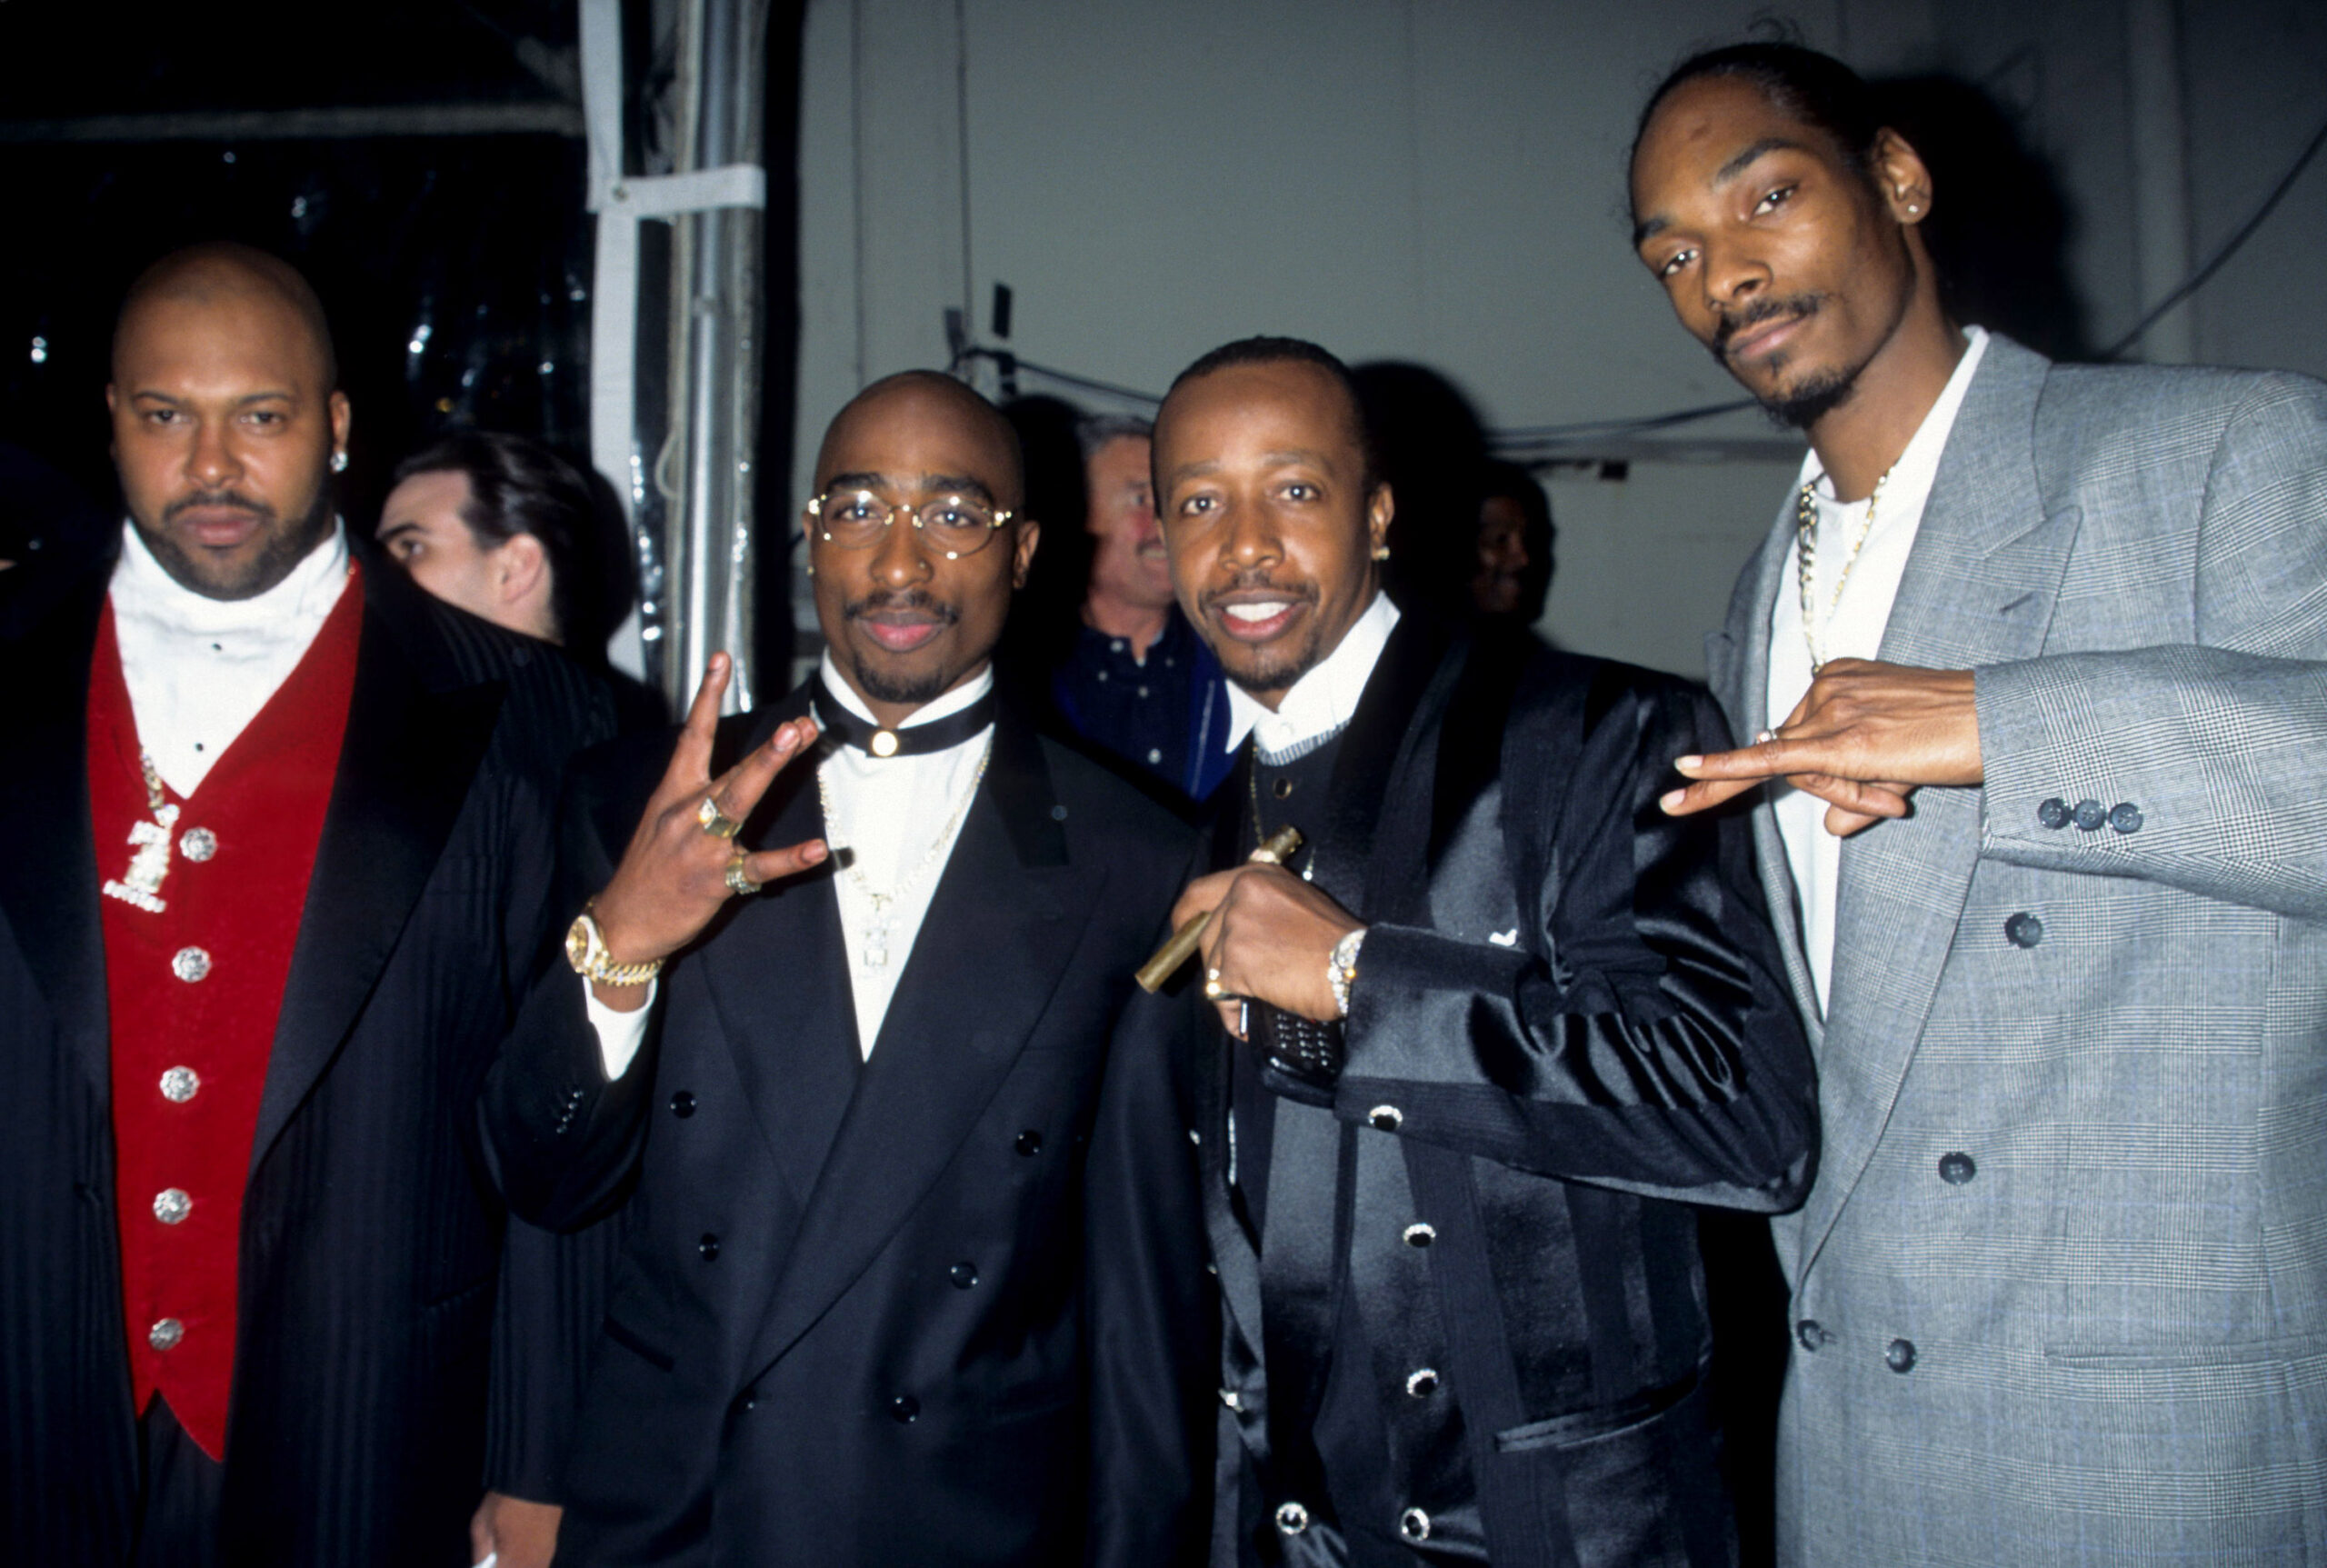 Death Row Pendants From Tupac & Snoop Dogg Set To Sell For High